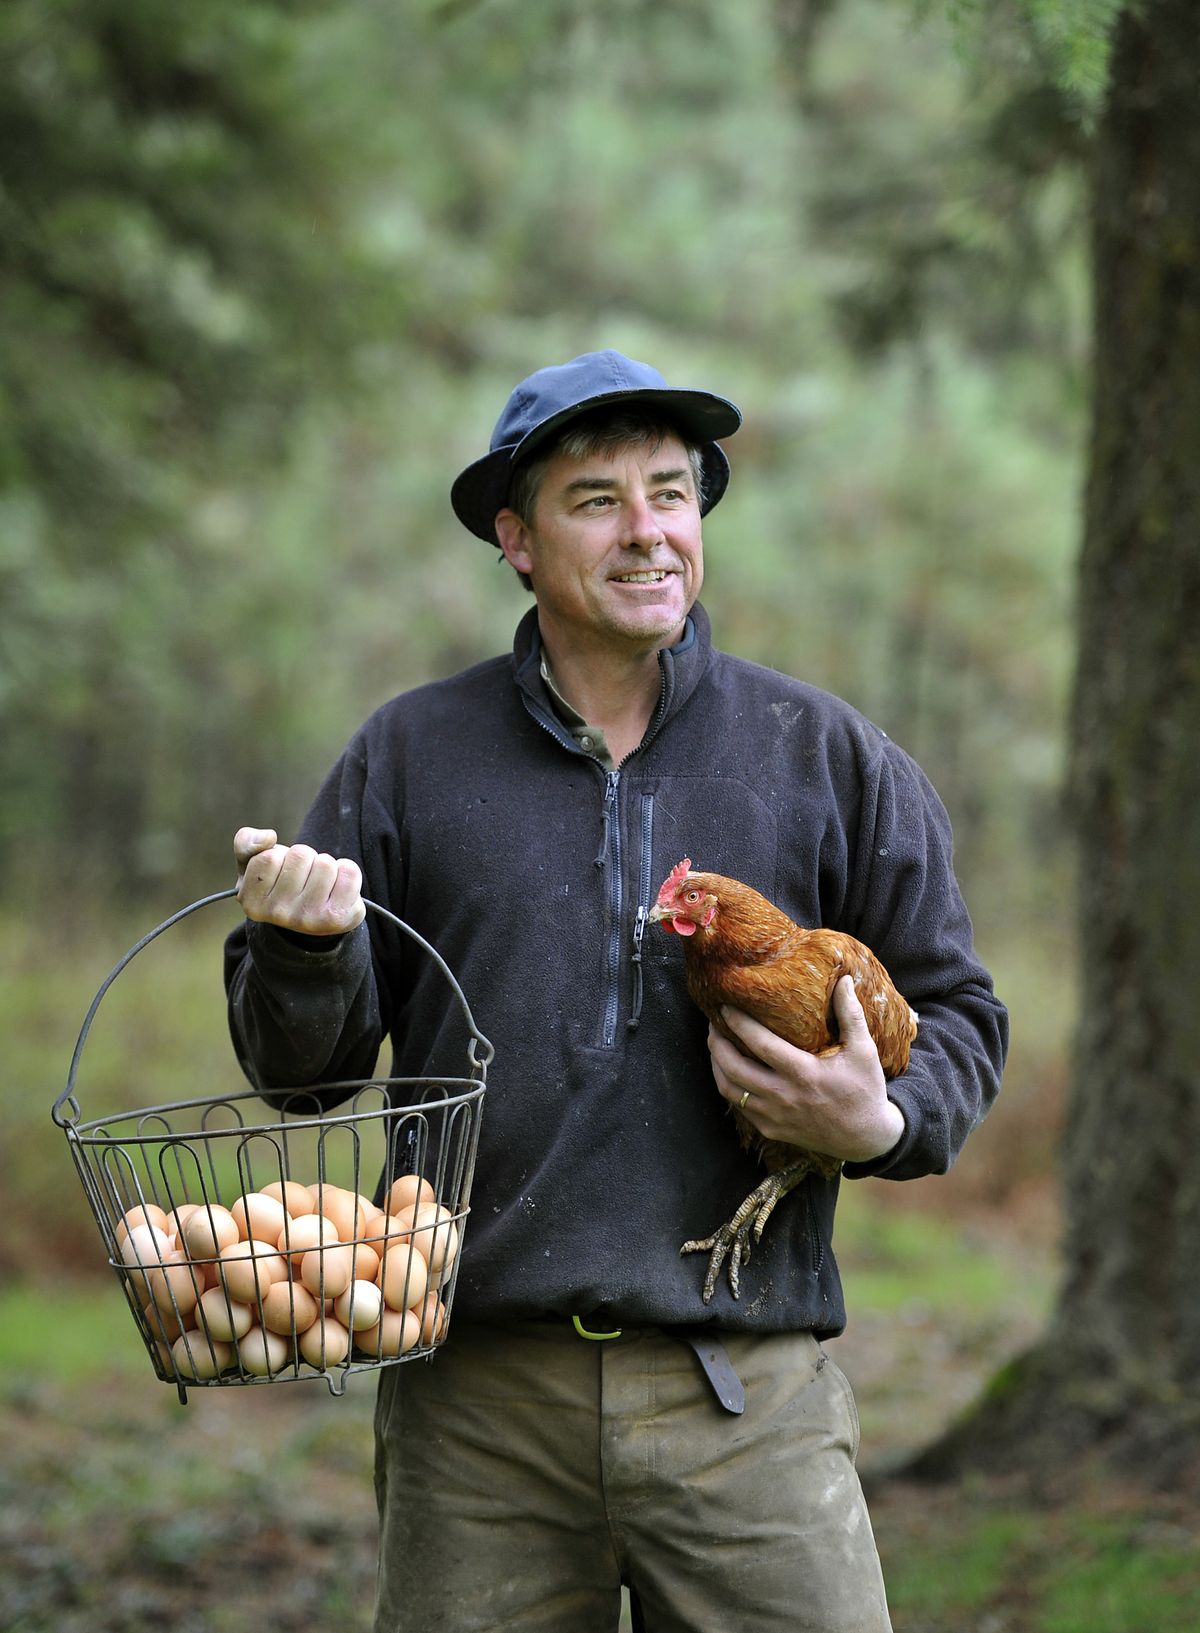 Tad Brooks has started a new career as an organic chicken farmer at his home. (Dan Pelle)